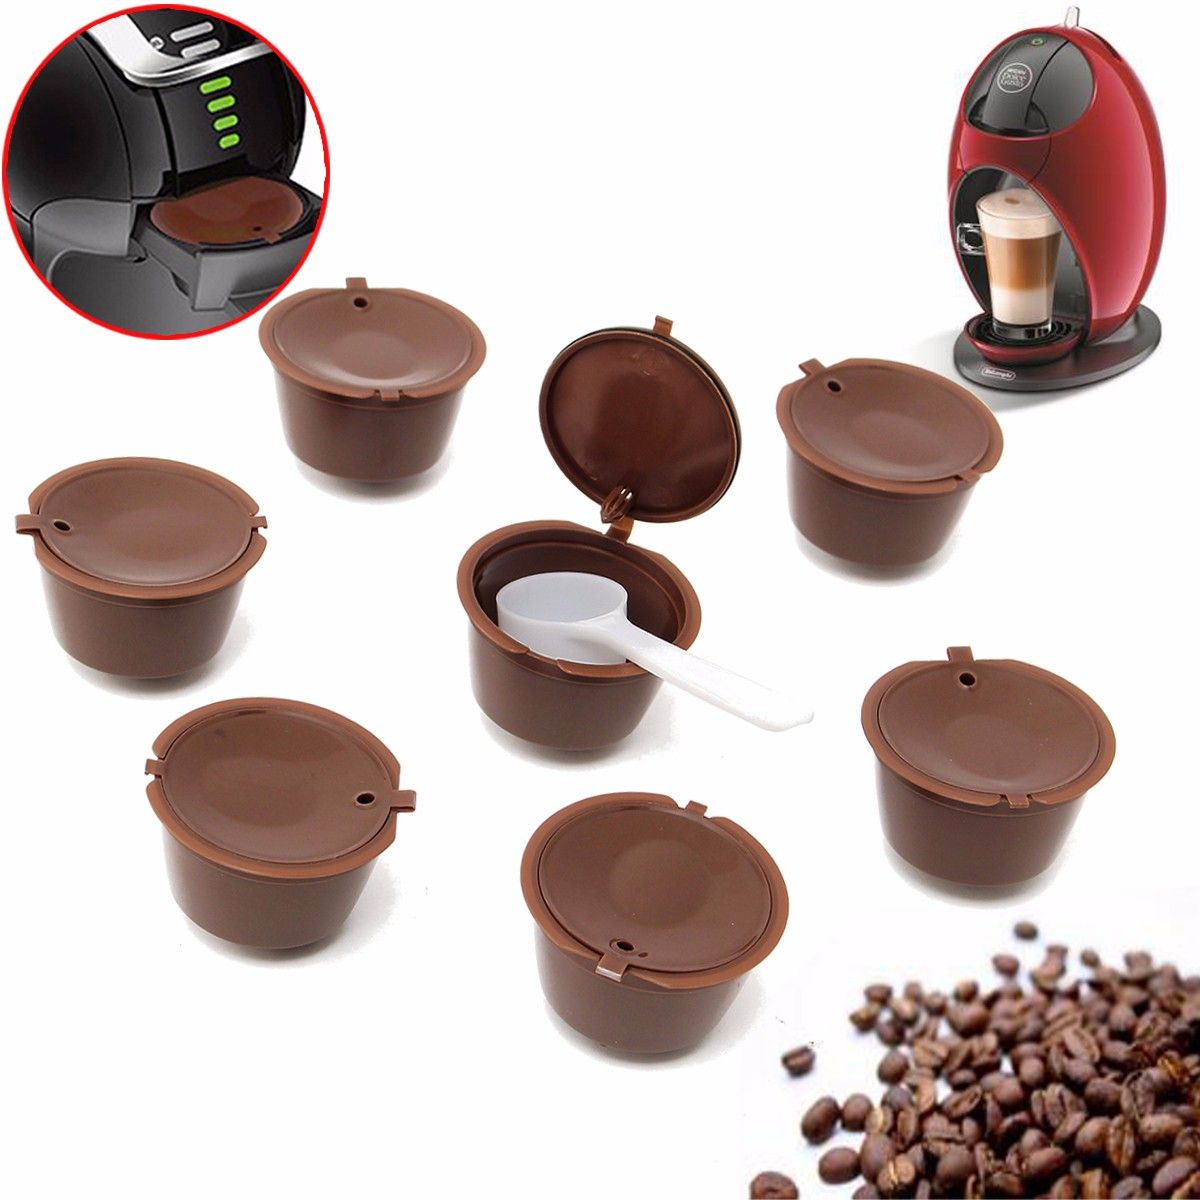 8Pcs-Set-Refillable-Coffee-Capsules-for-Dolce-Gusto-Reusable-Brewers-Refill-Coffee-Cup-Filter-1257148